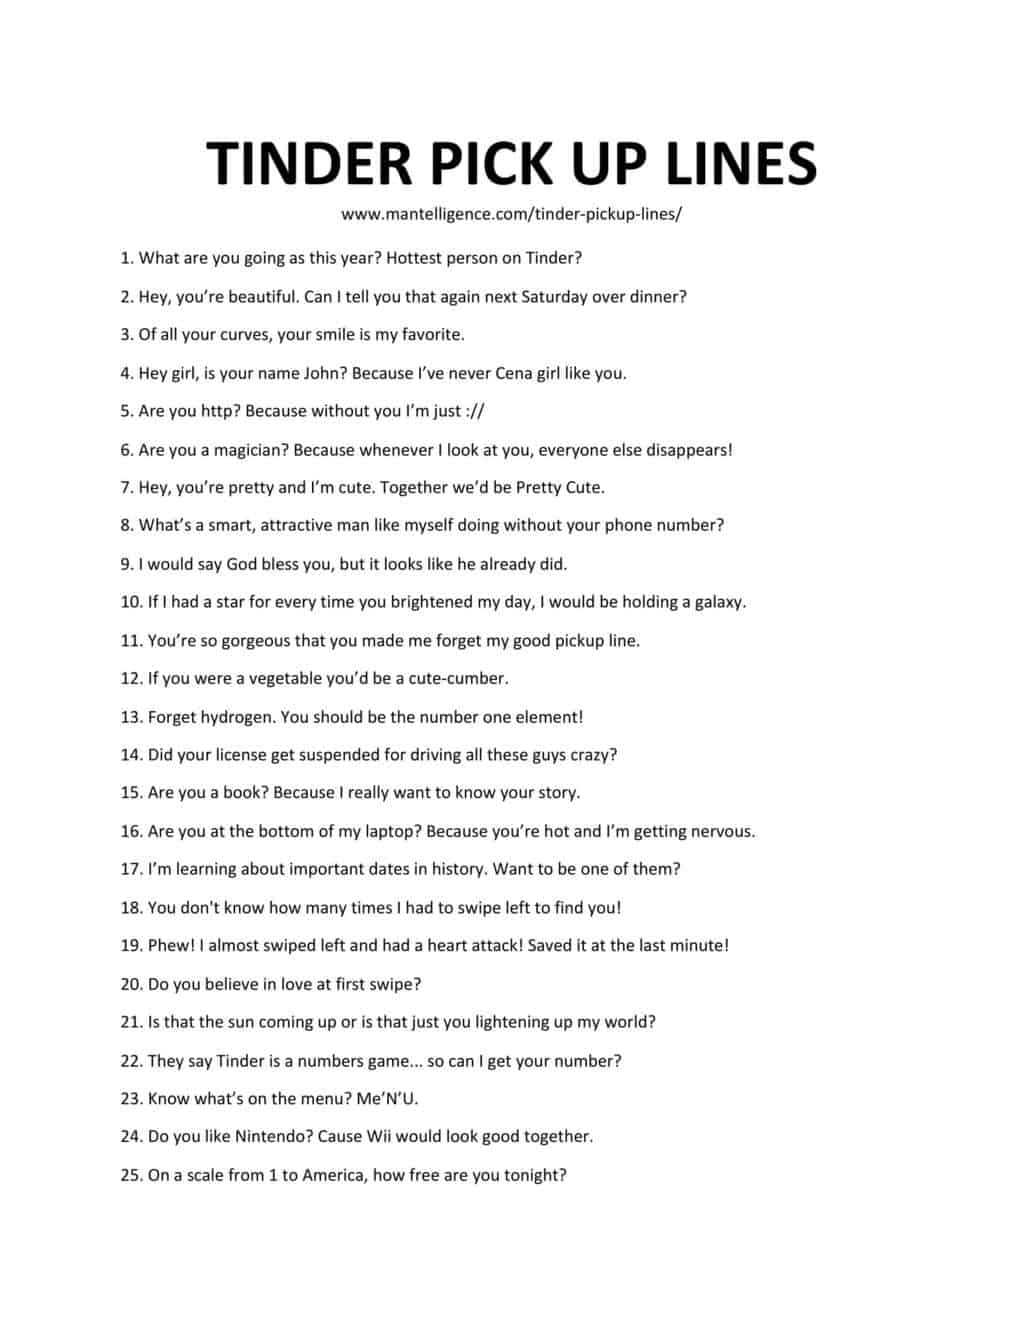 Downloadable list of pick-up lines 